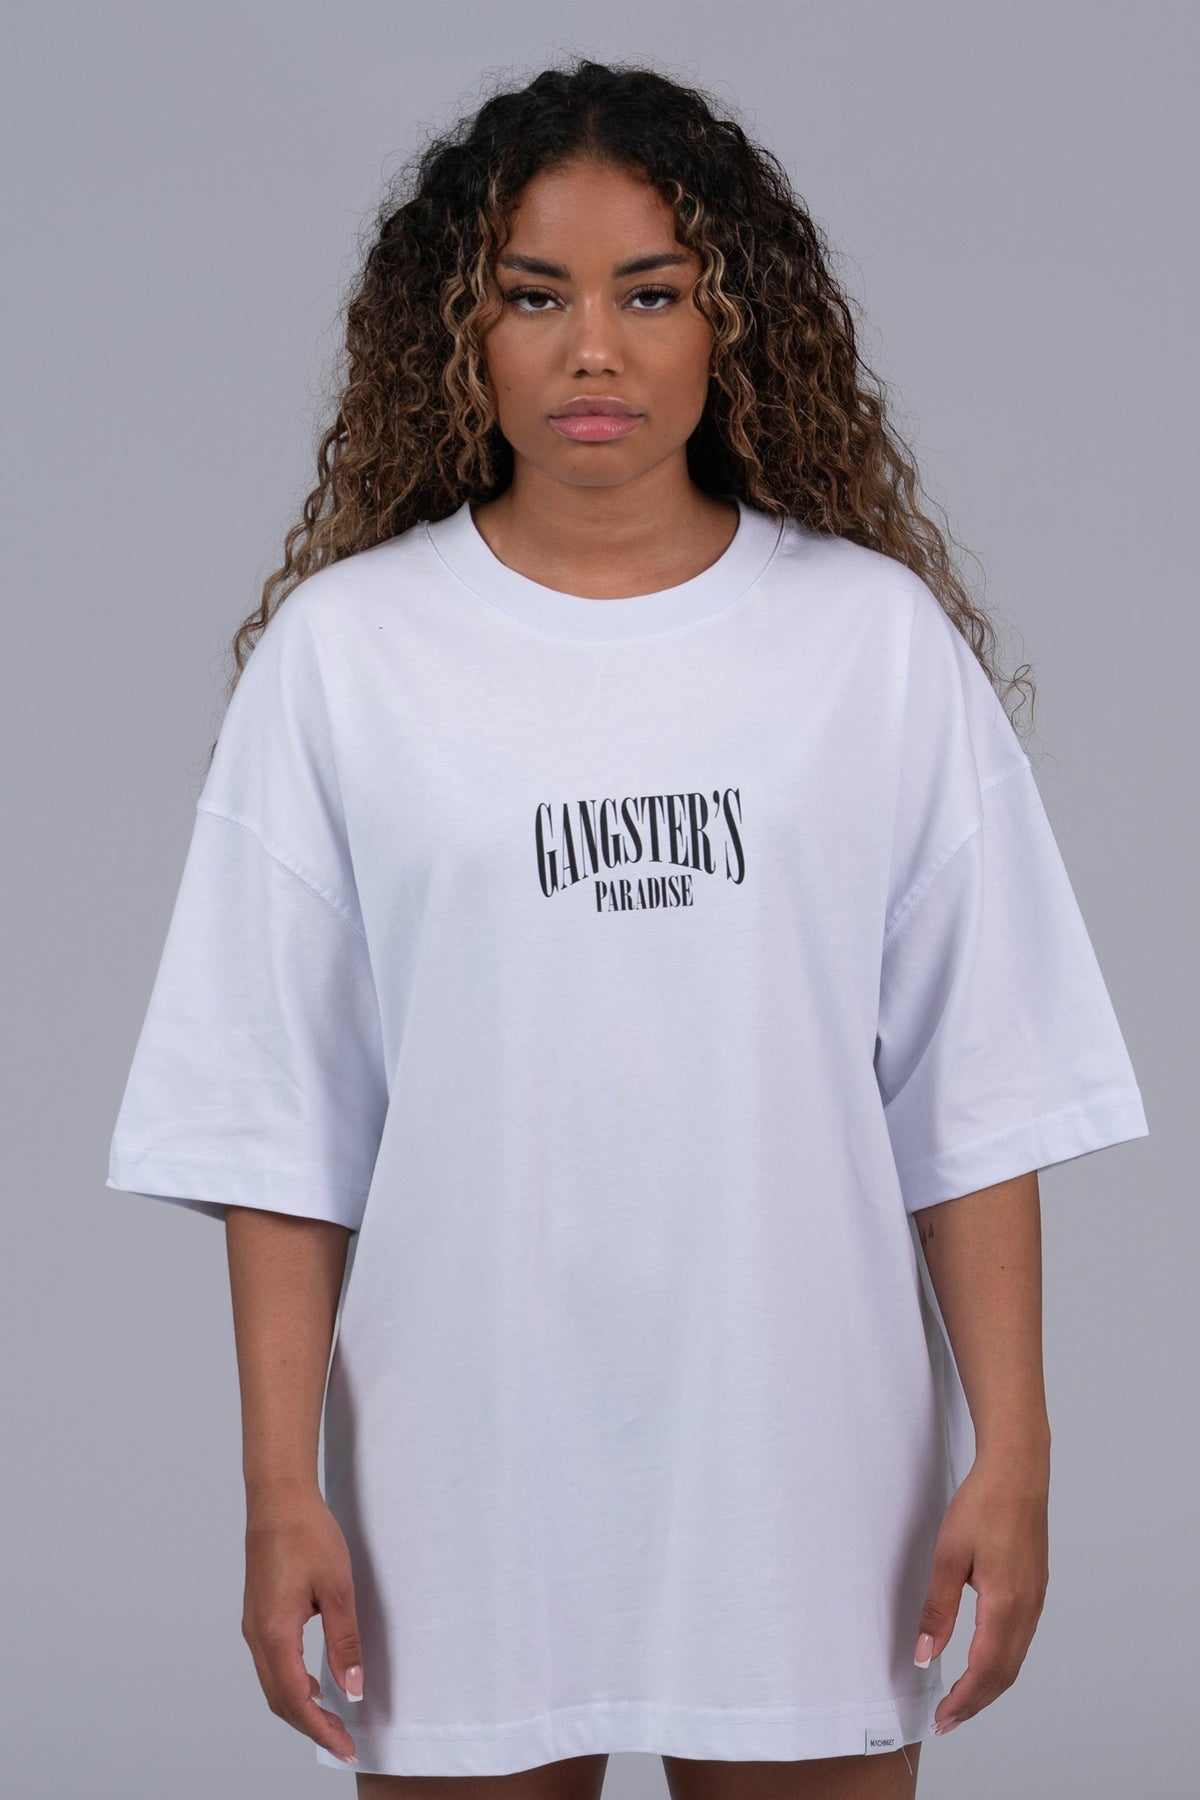 Gangsters white tee